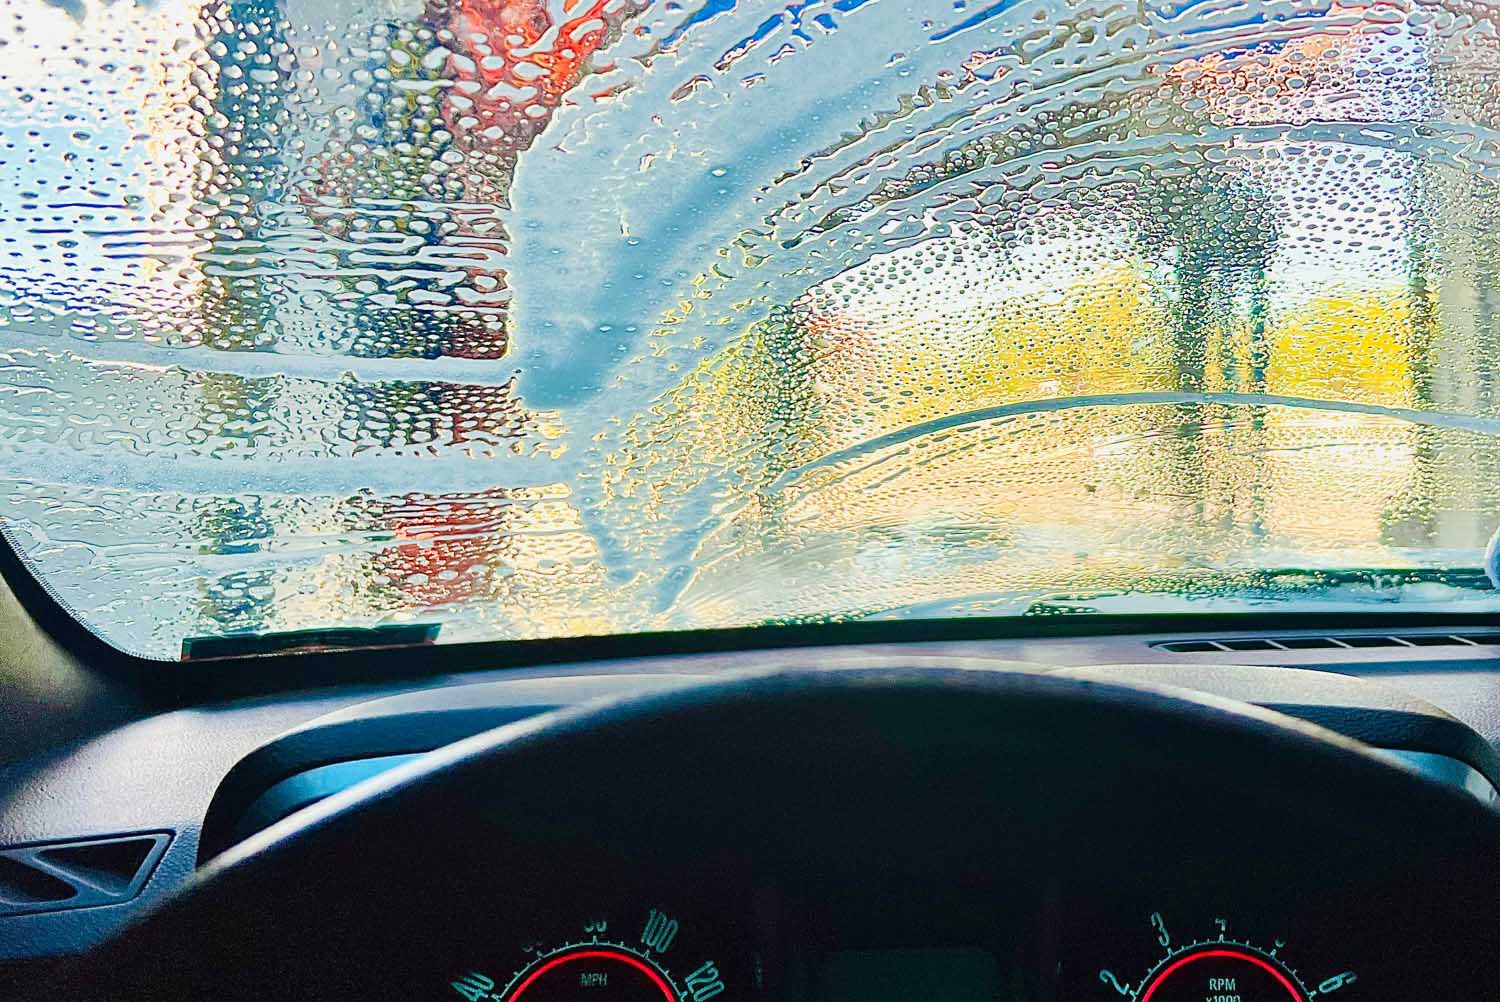 What Really Goes On inside the Carwash?